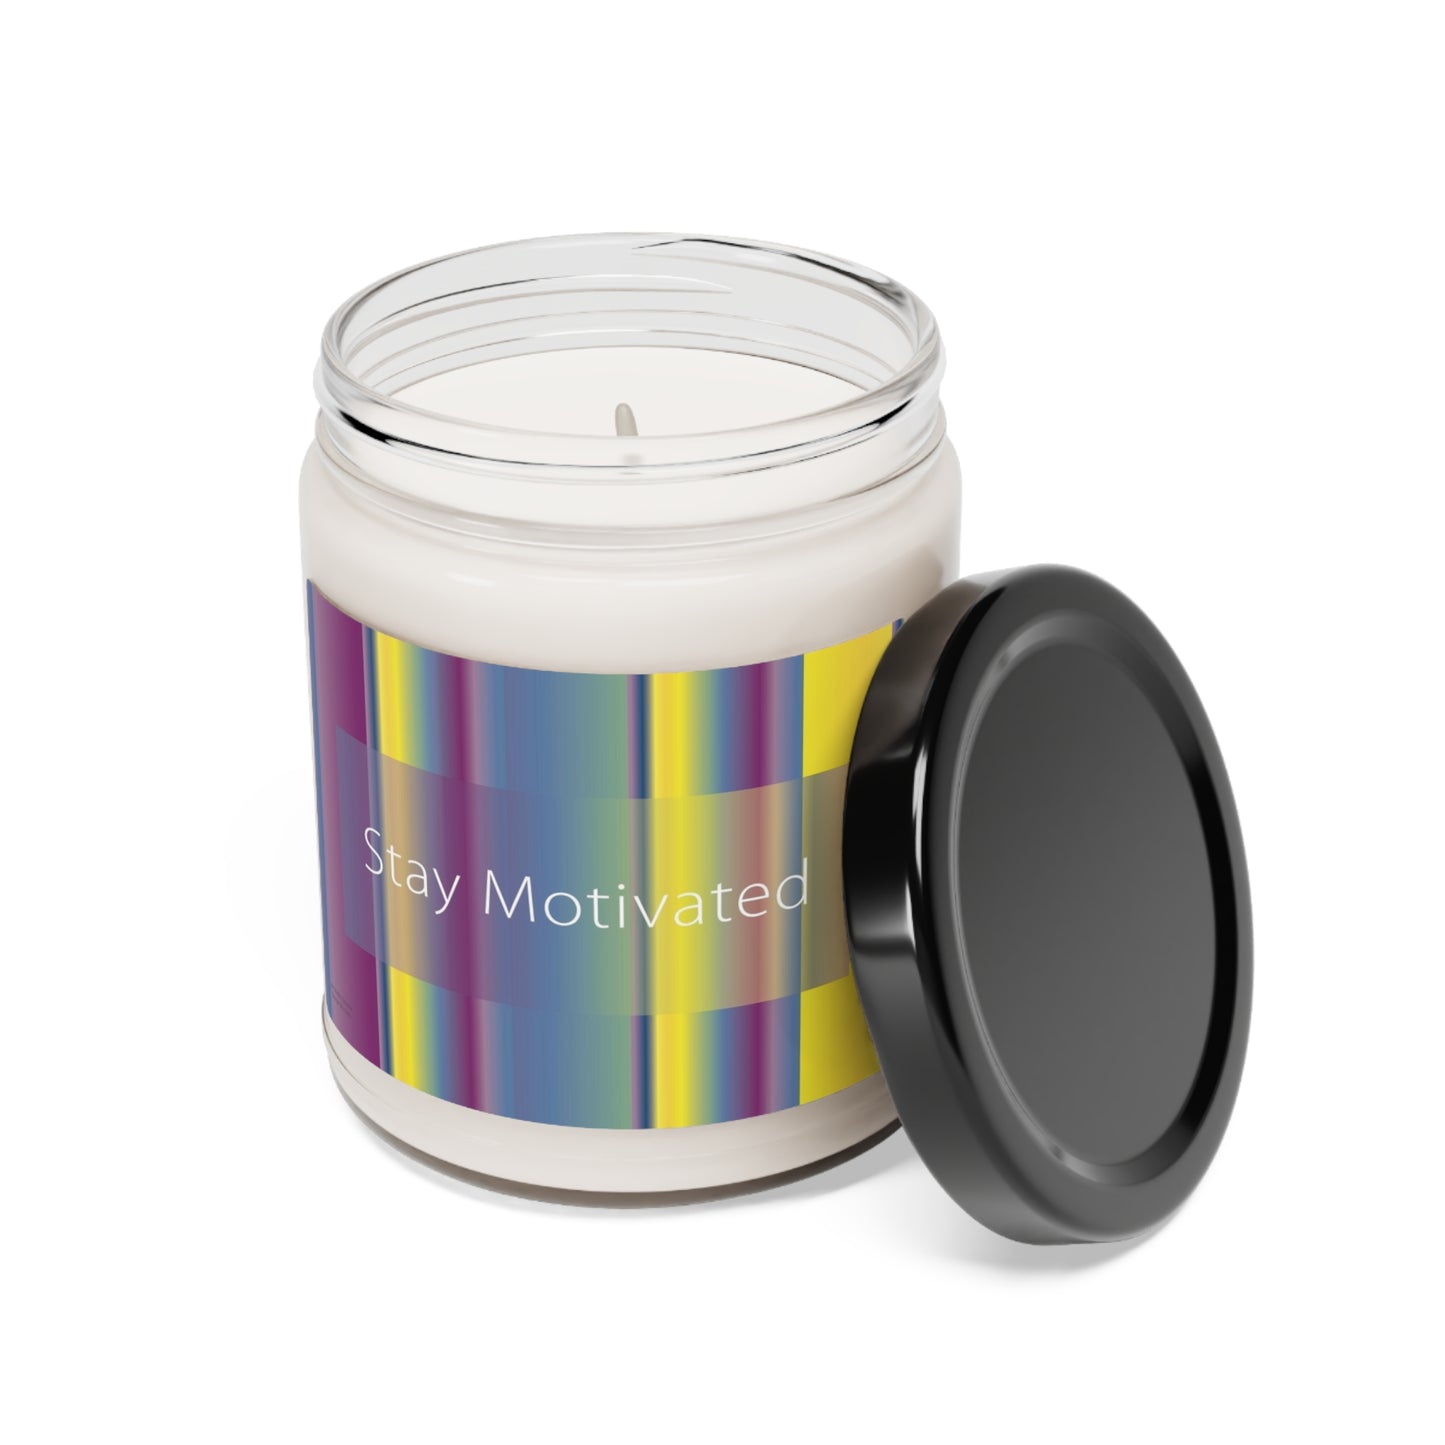 Scented Soy Candle, 9oz Stay Motivated - Design No.1300